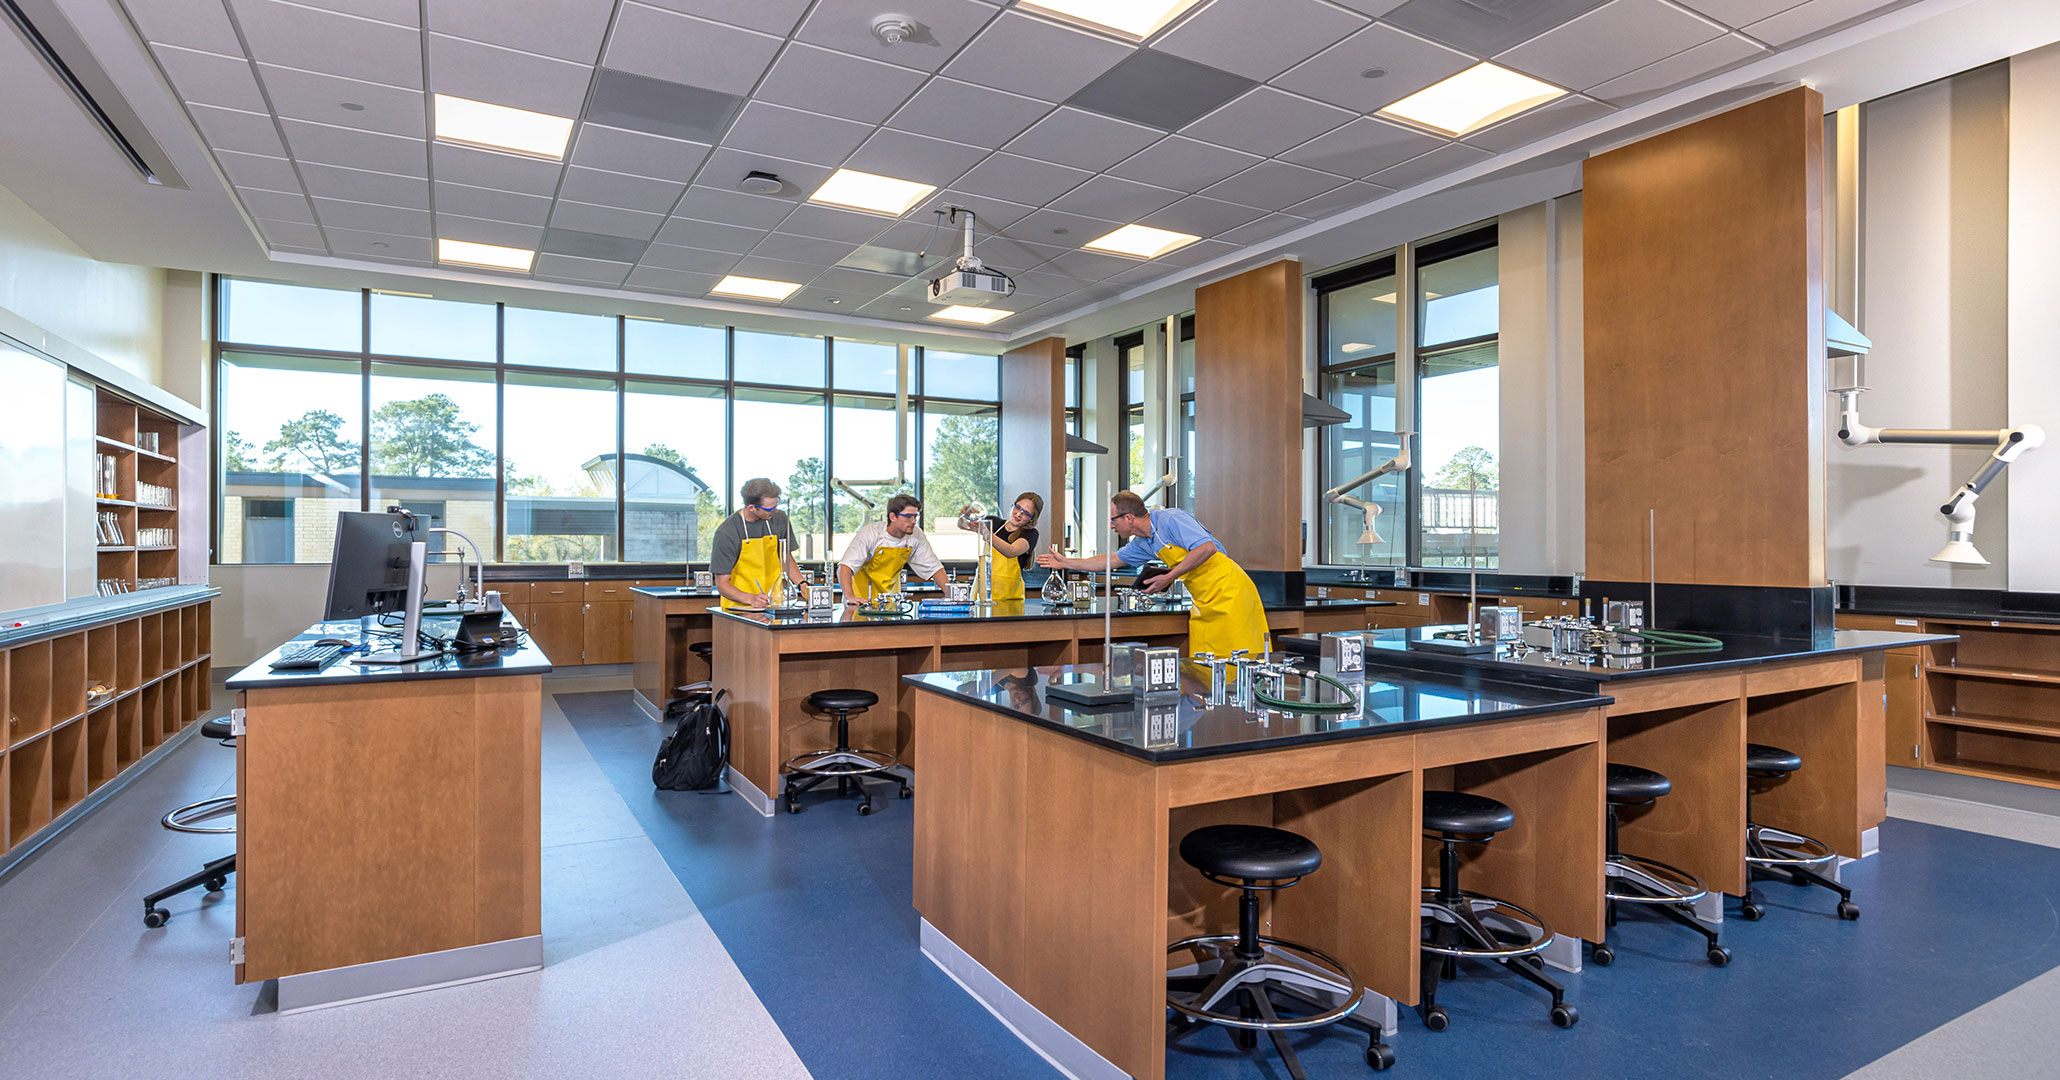 BOUDREAUX architects designed chemistry, biology, and physics classrooms at Midlands Technical College